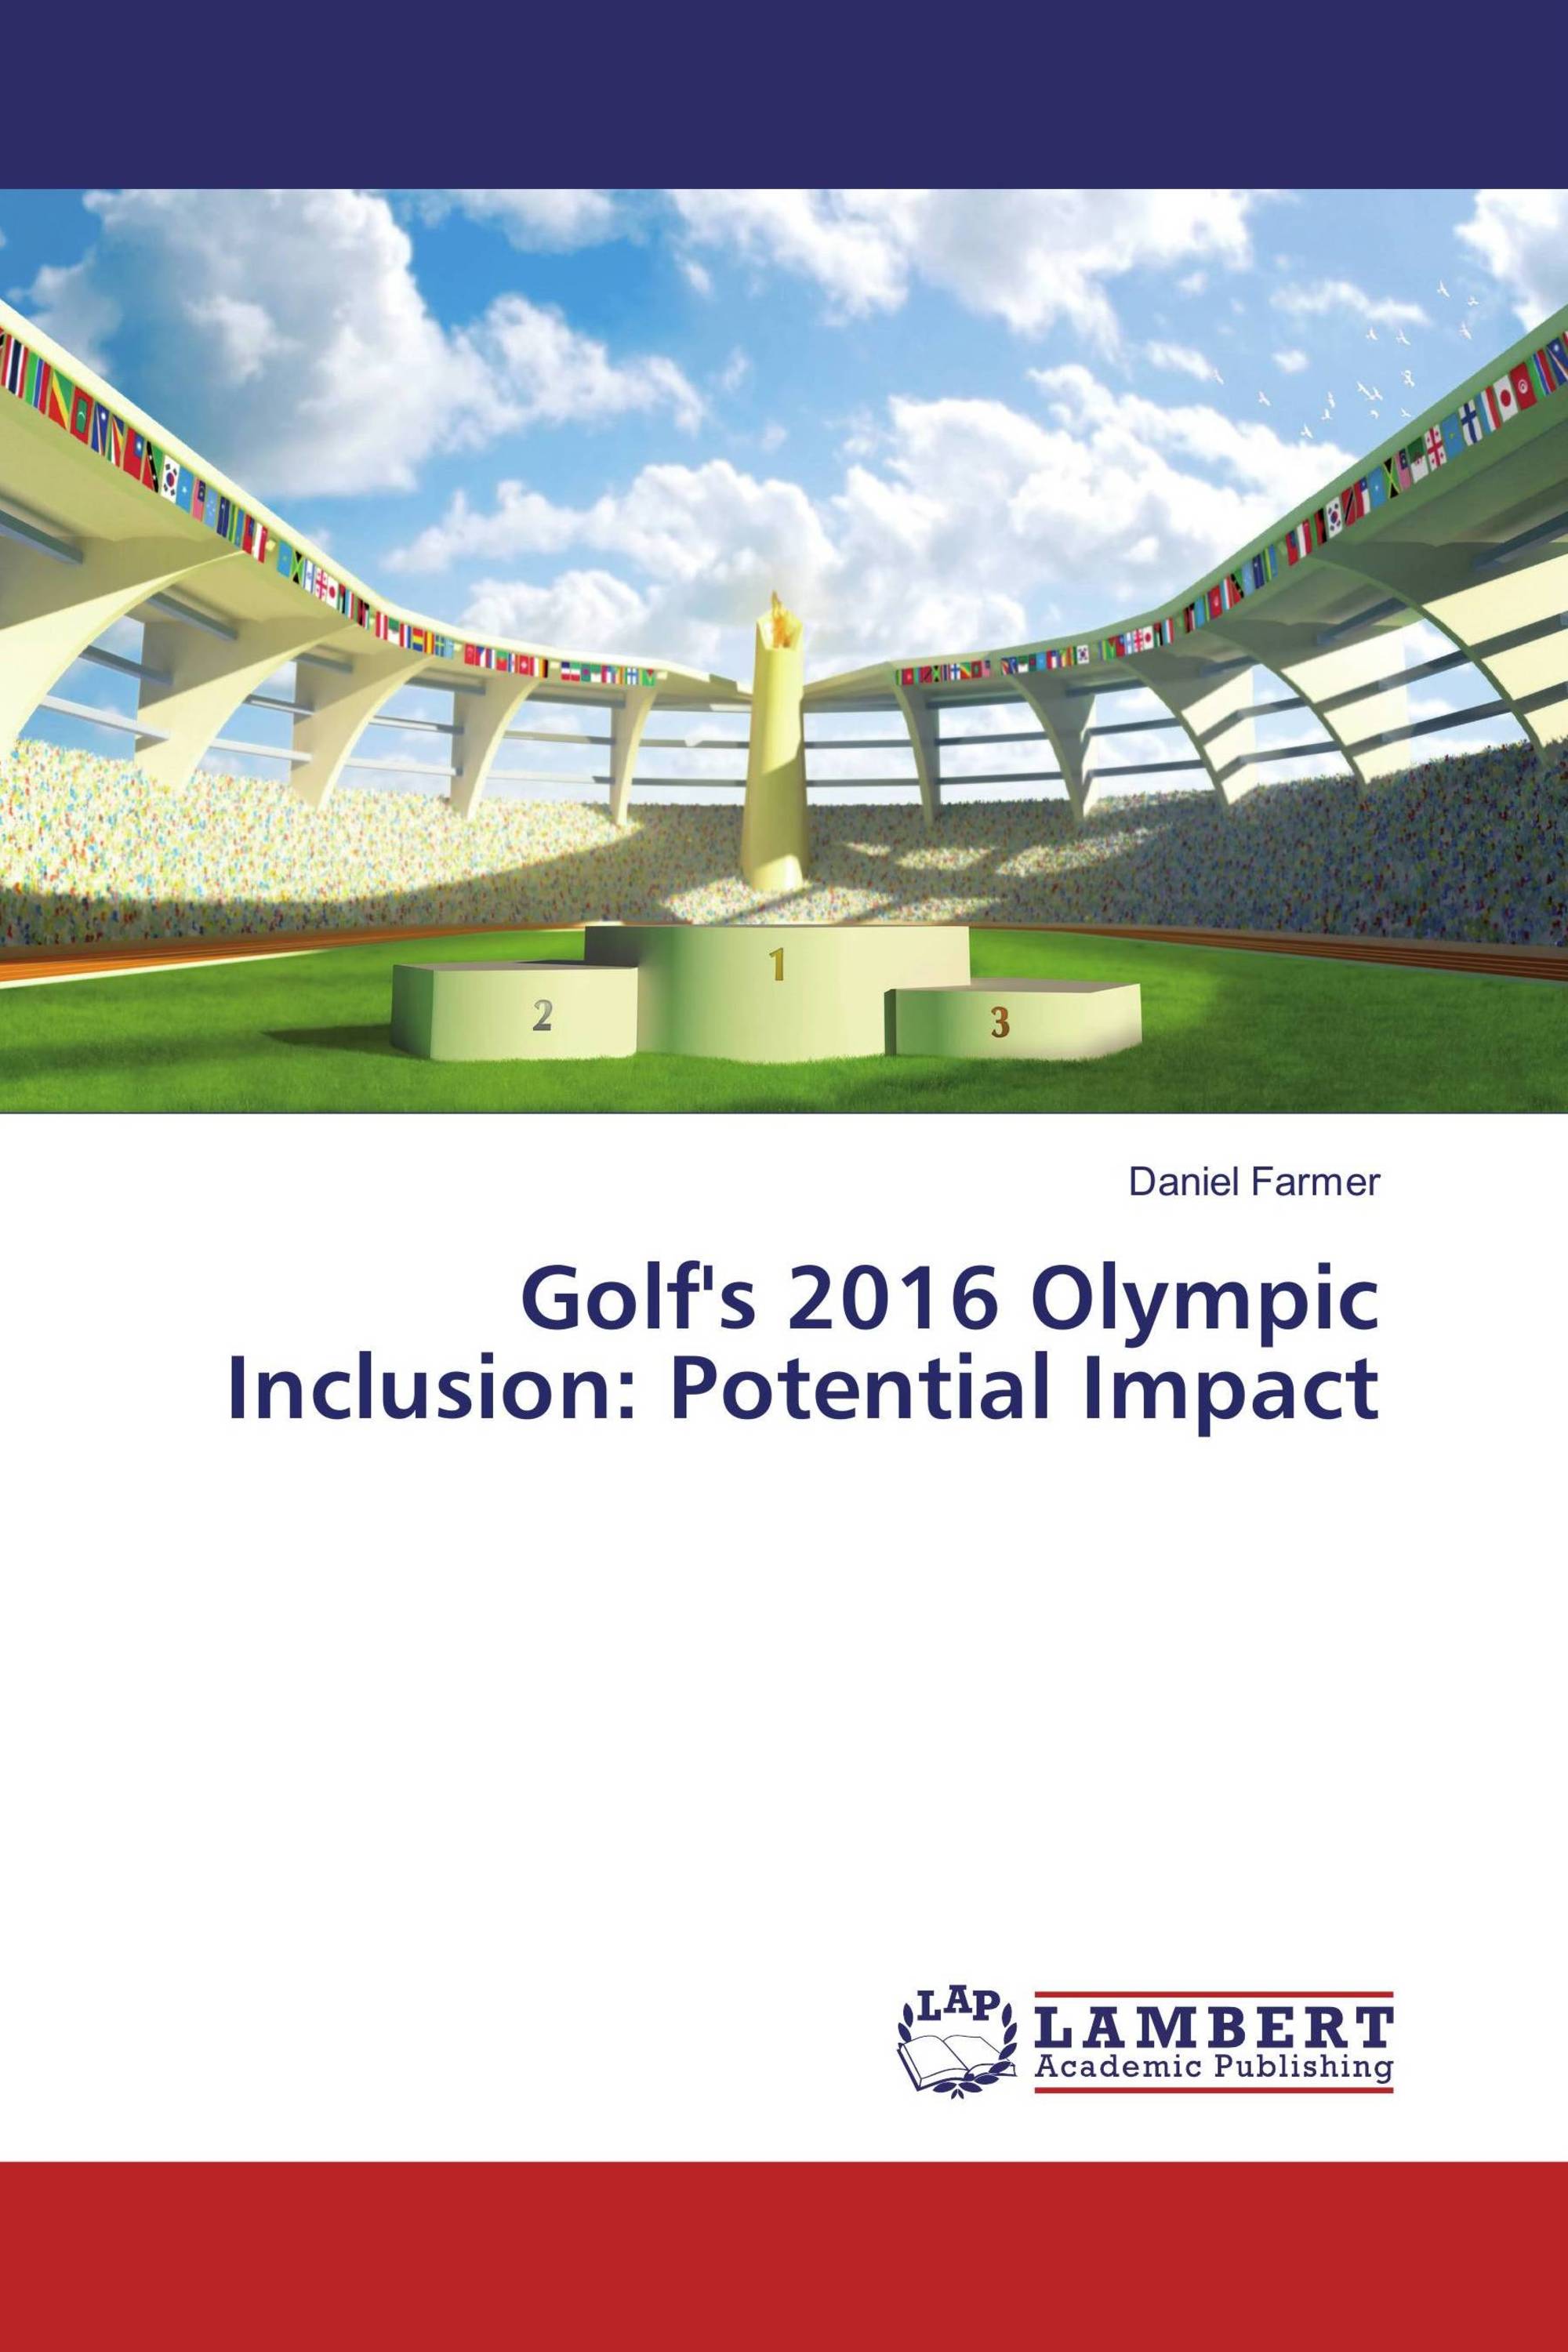 Golf's 2016 Olympic Inclusion: Potential Impact